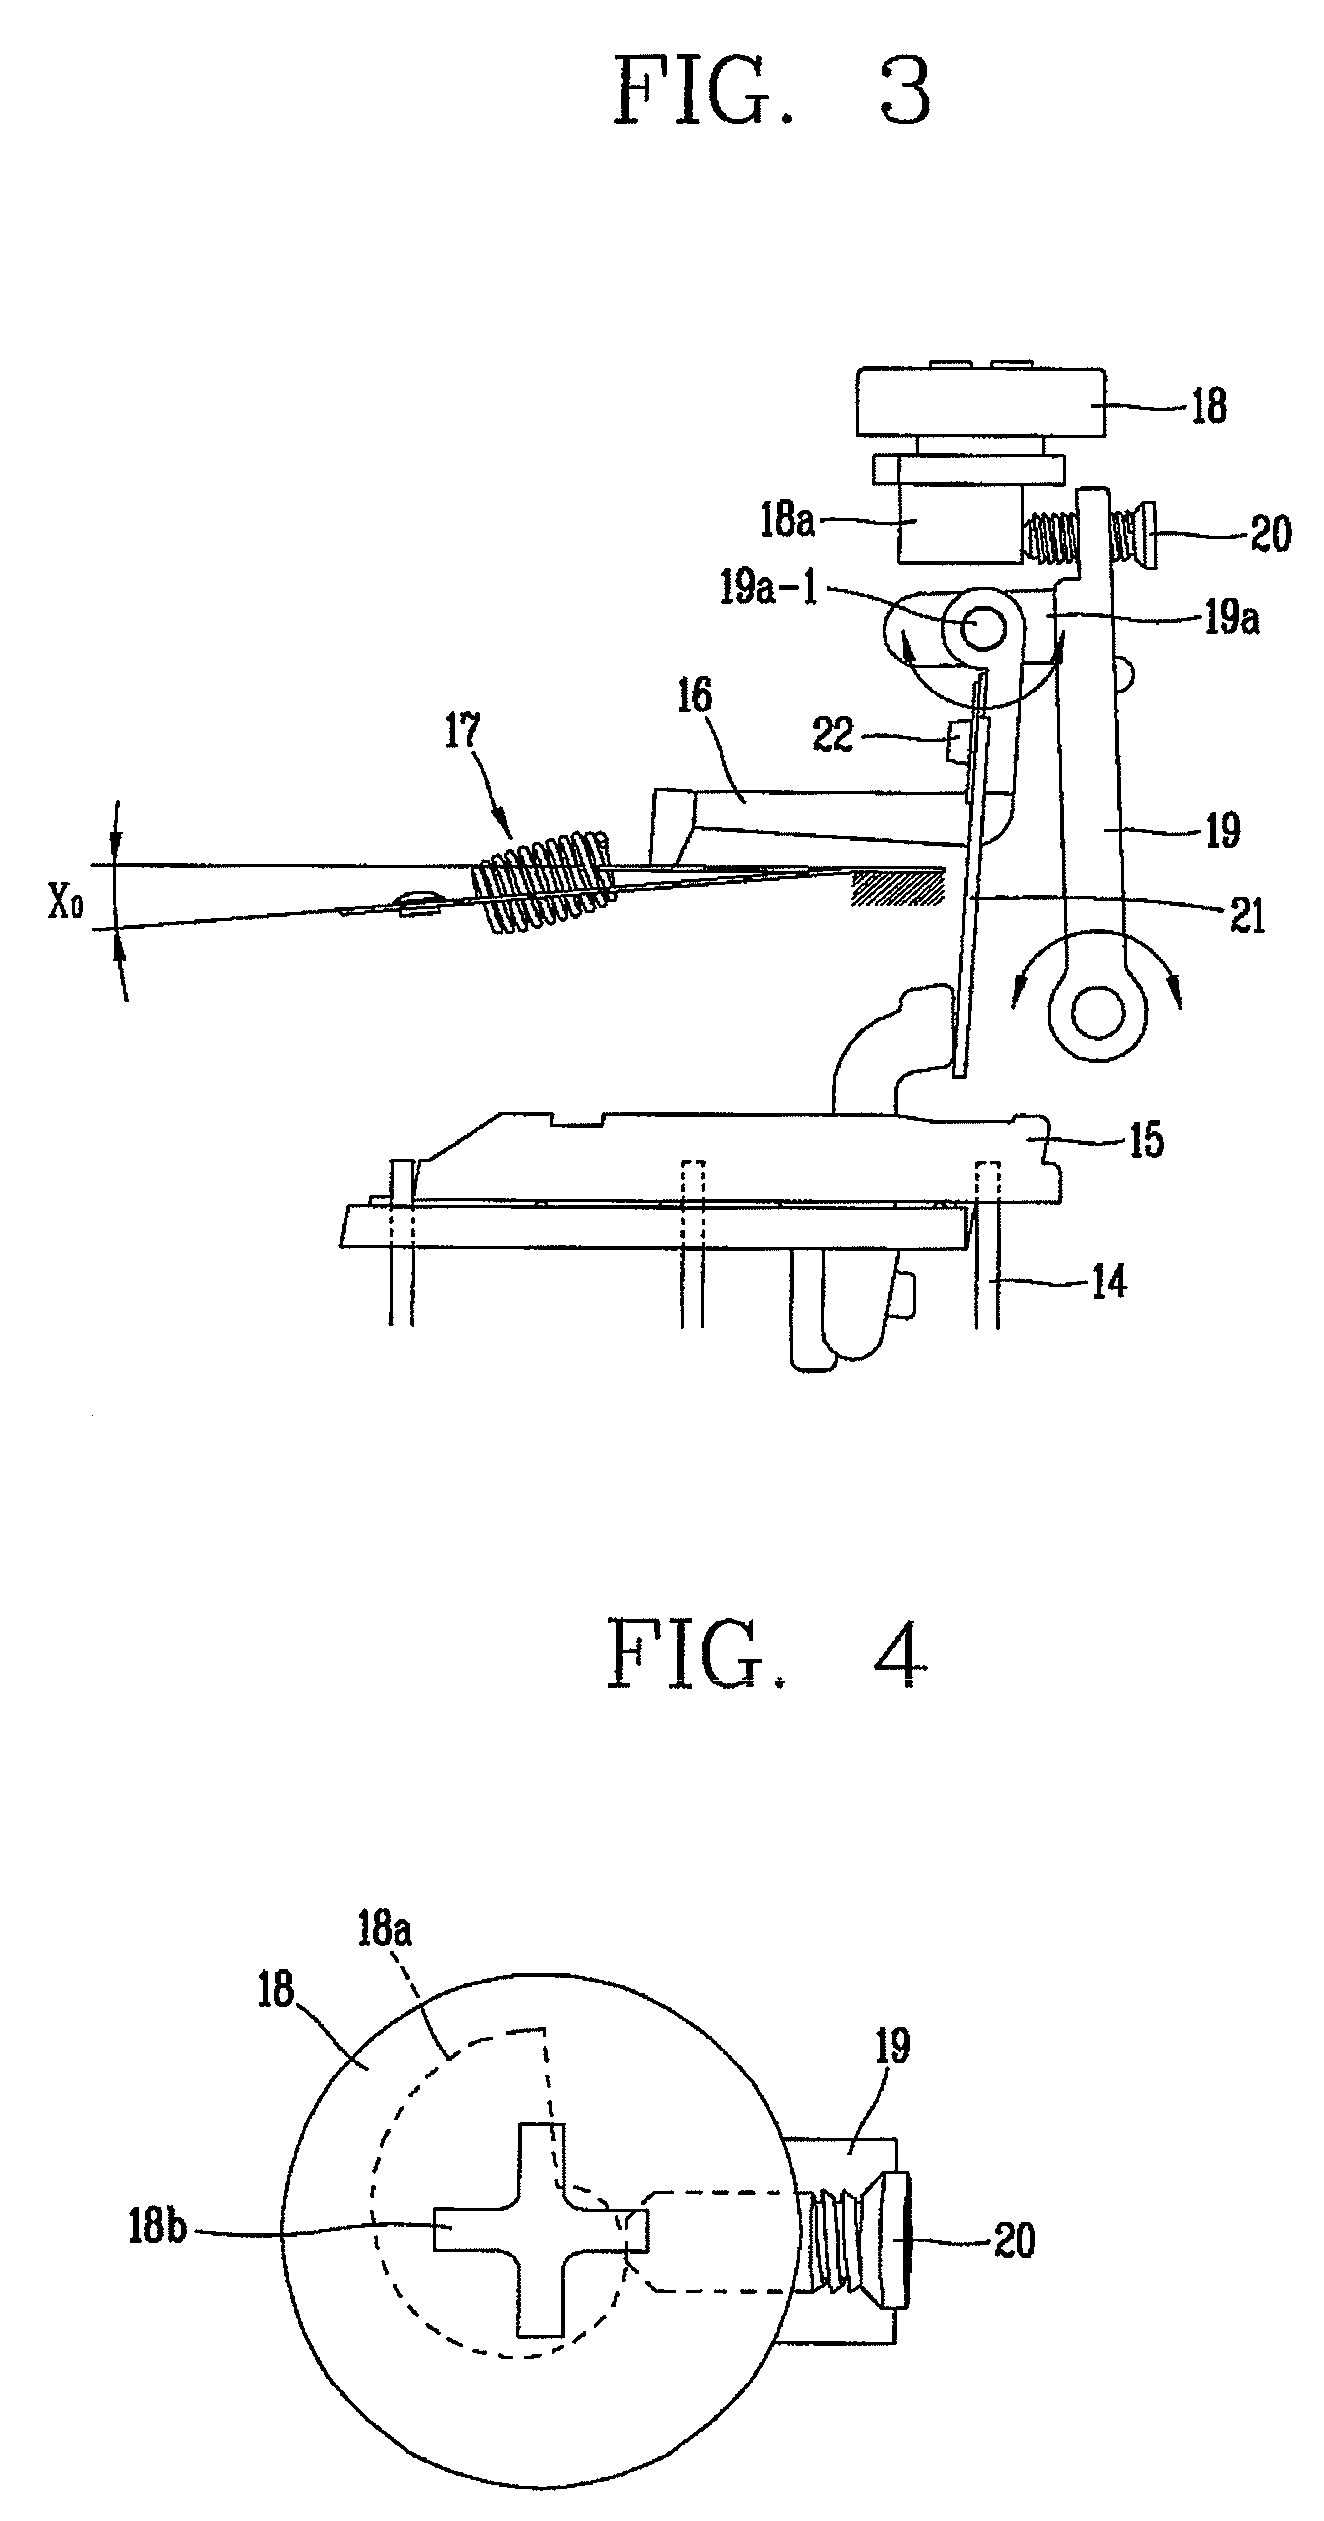 Thermal overload trip apparatus and method for adjusting trip sensitivity thereof